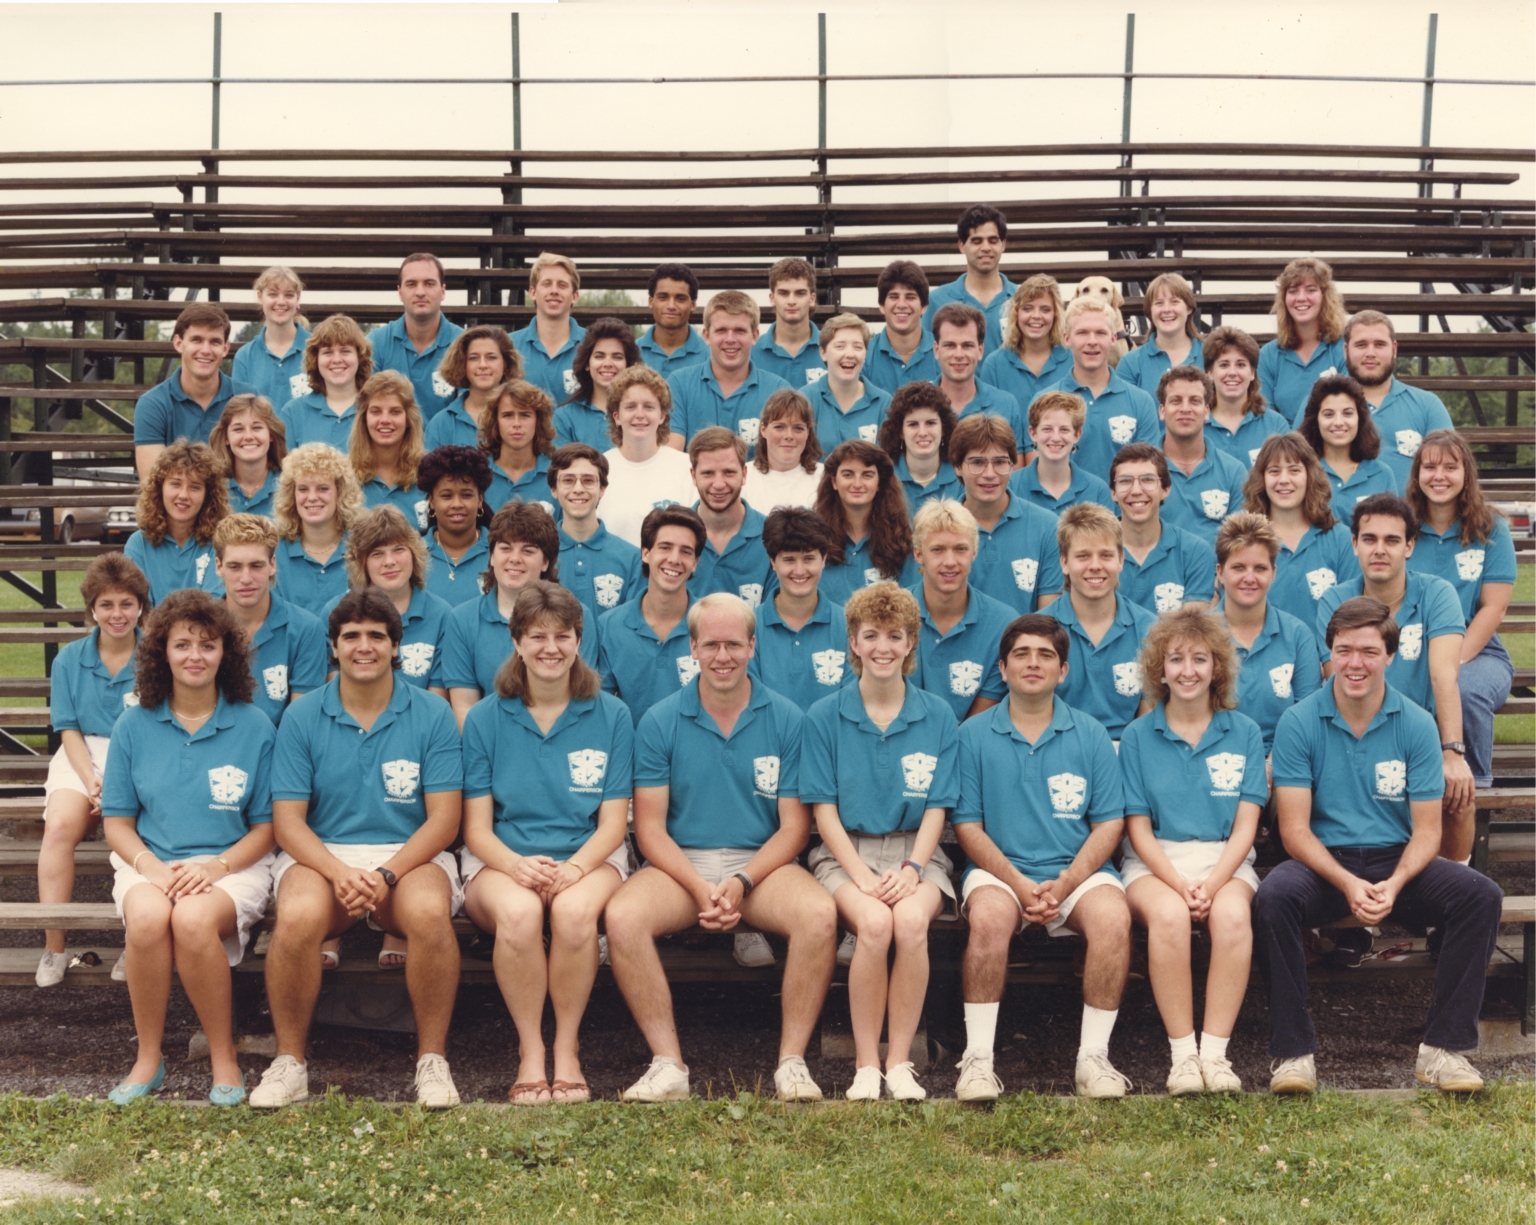 1987 Student Orientation Services Leaders